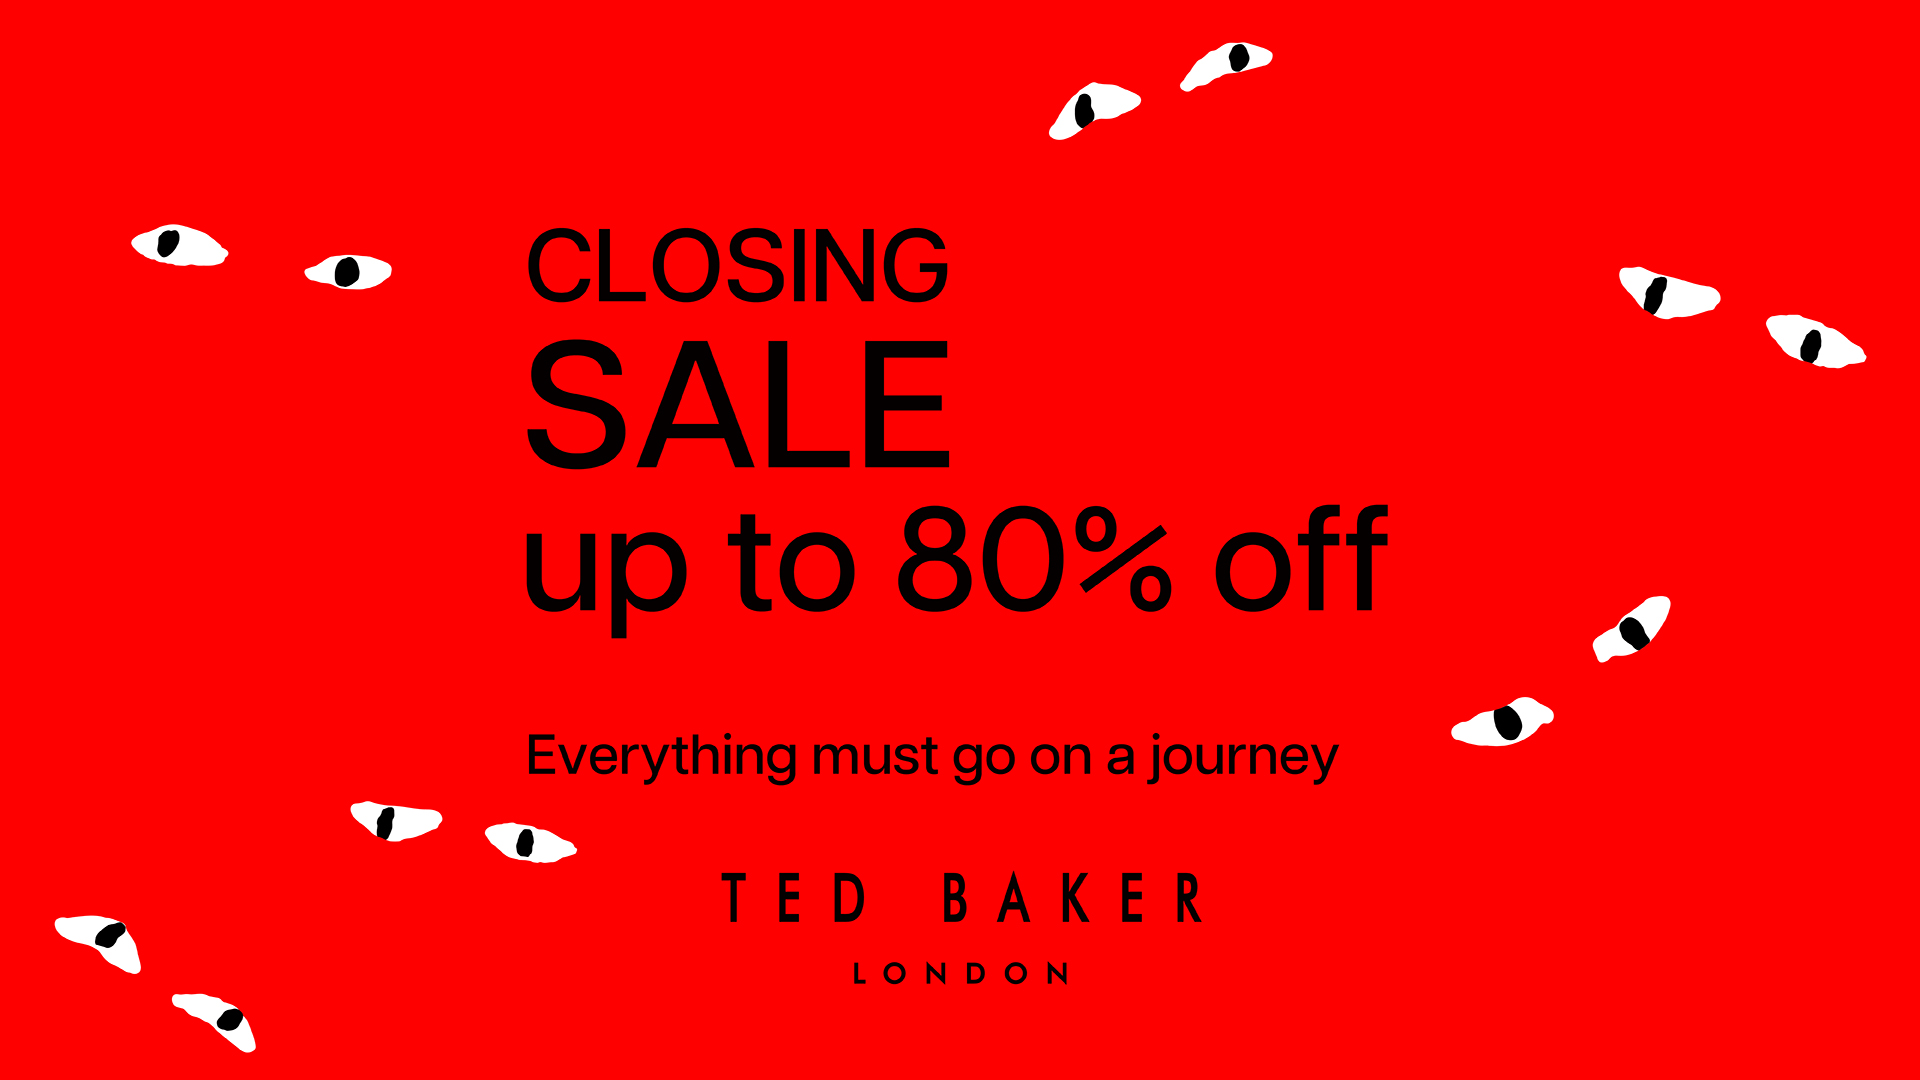 CLOSING SALE up to 80% off